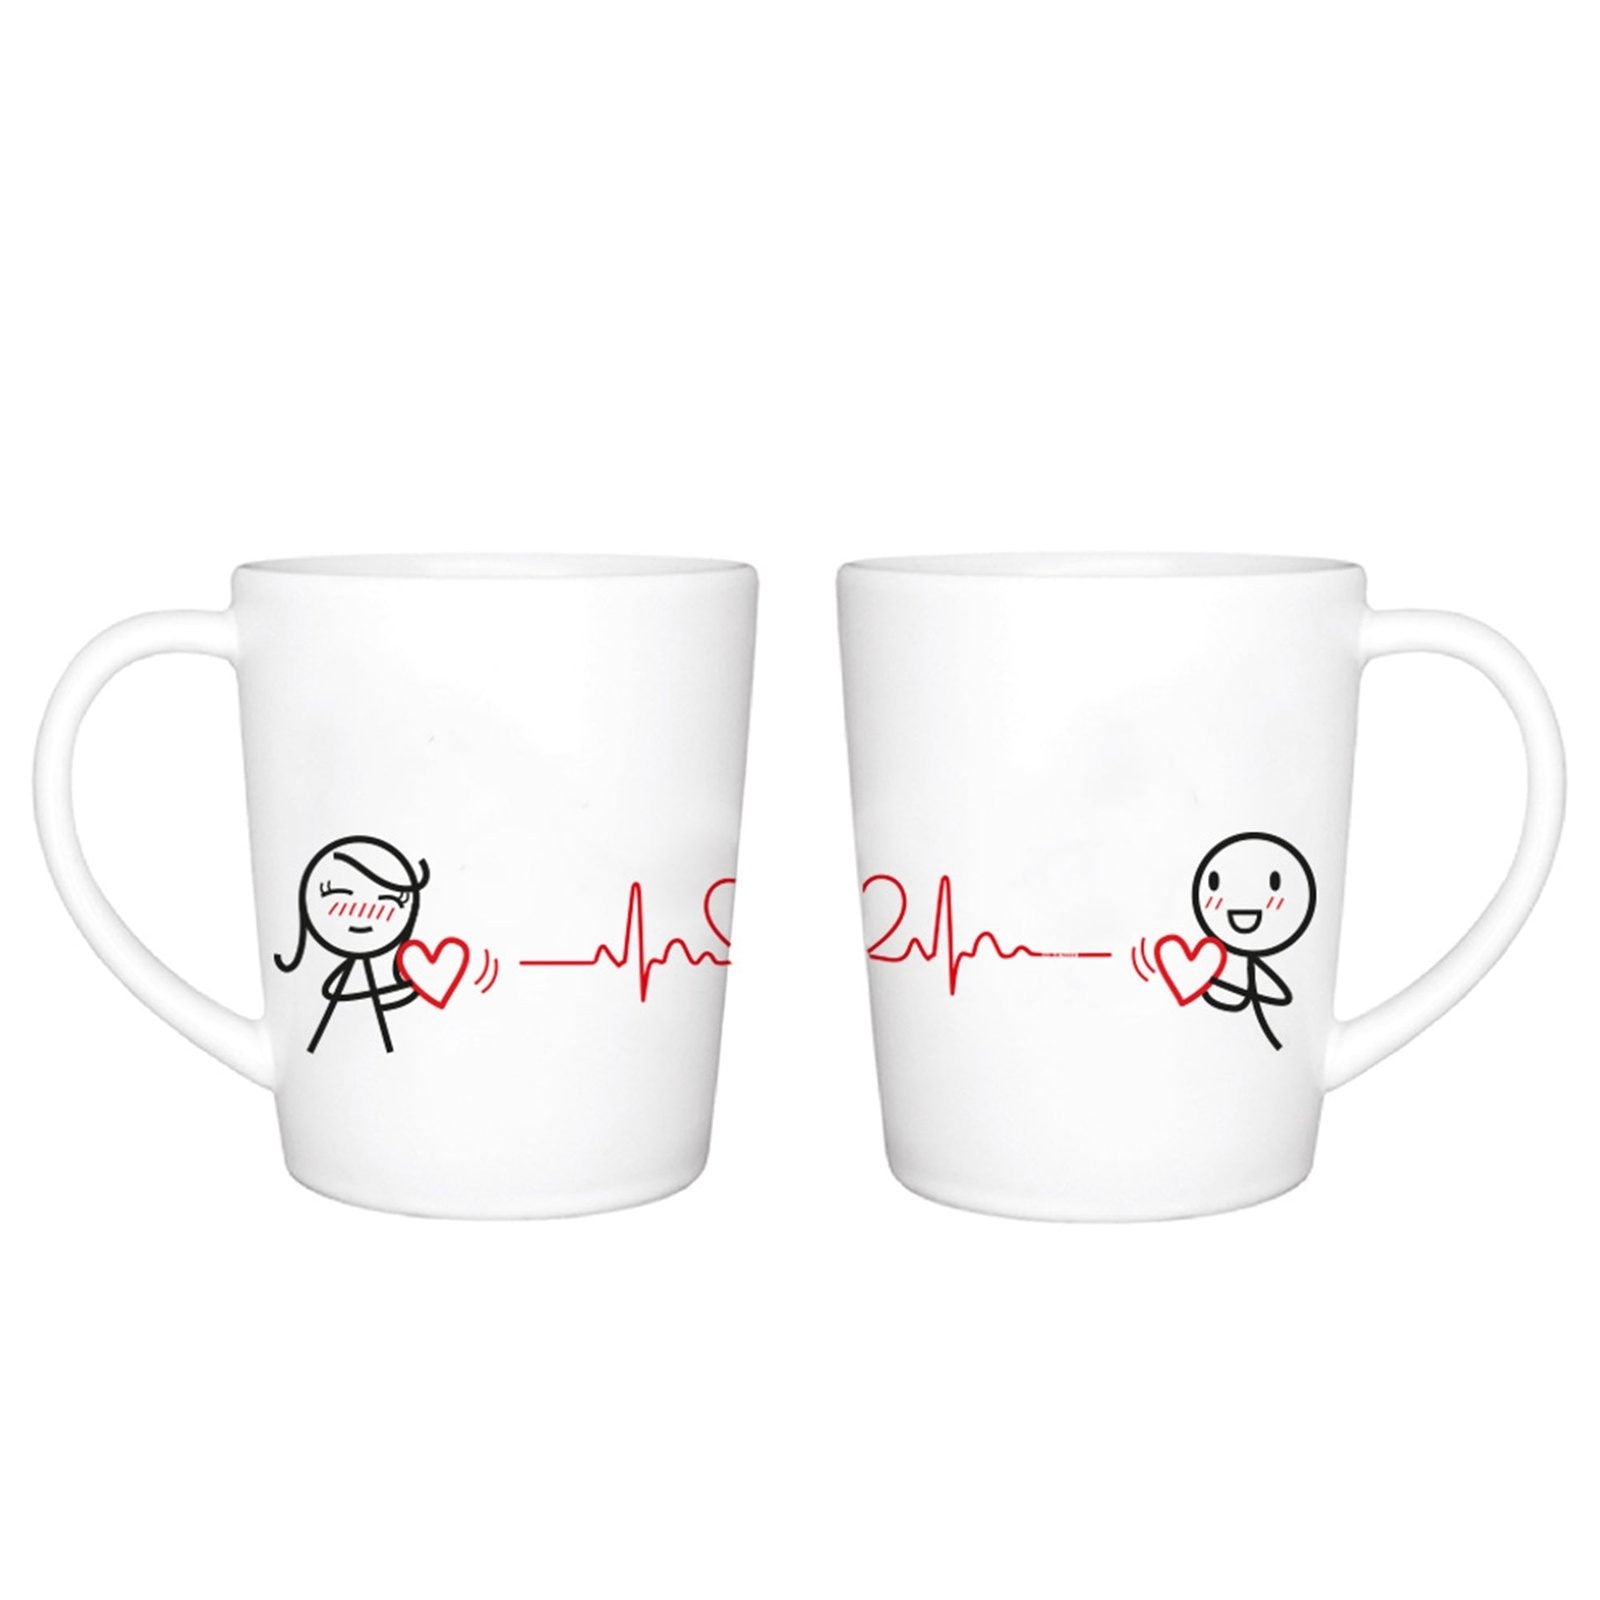 Heart beat for youHome & GardenHuman Touch OfficialThis "Heart beat for you" mug will have your heart pumping for that special someone! Show your love and affection by gifting this heart-warming (literally!) coffee m